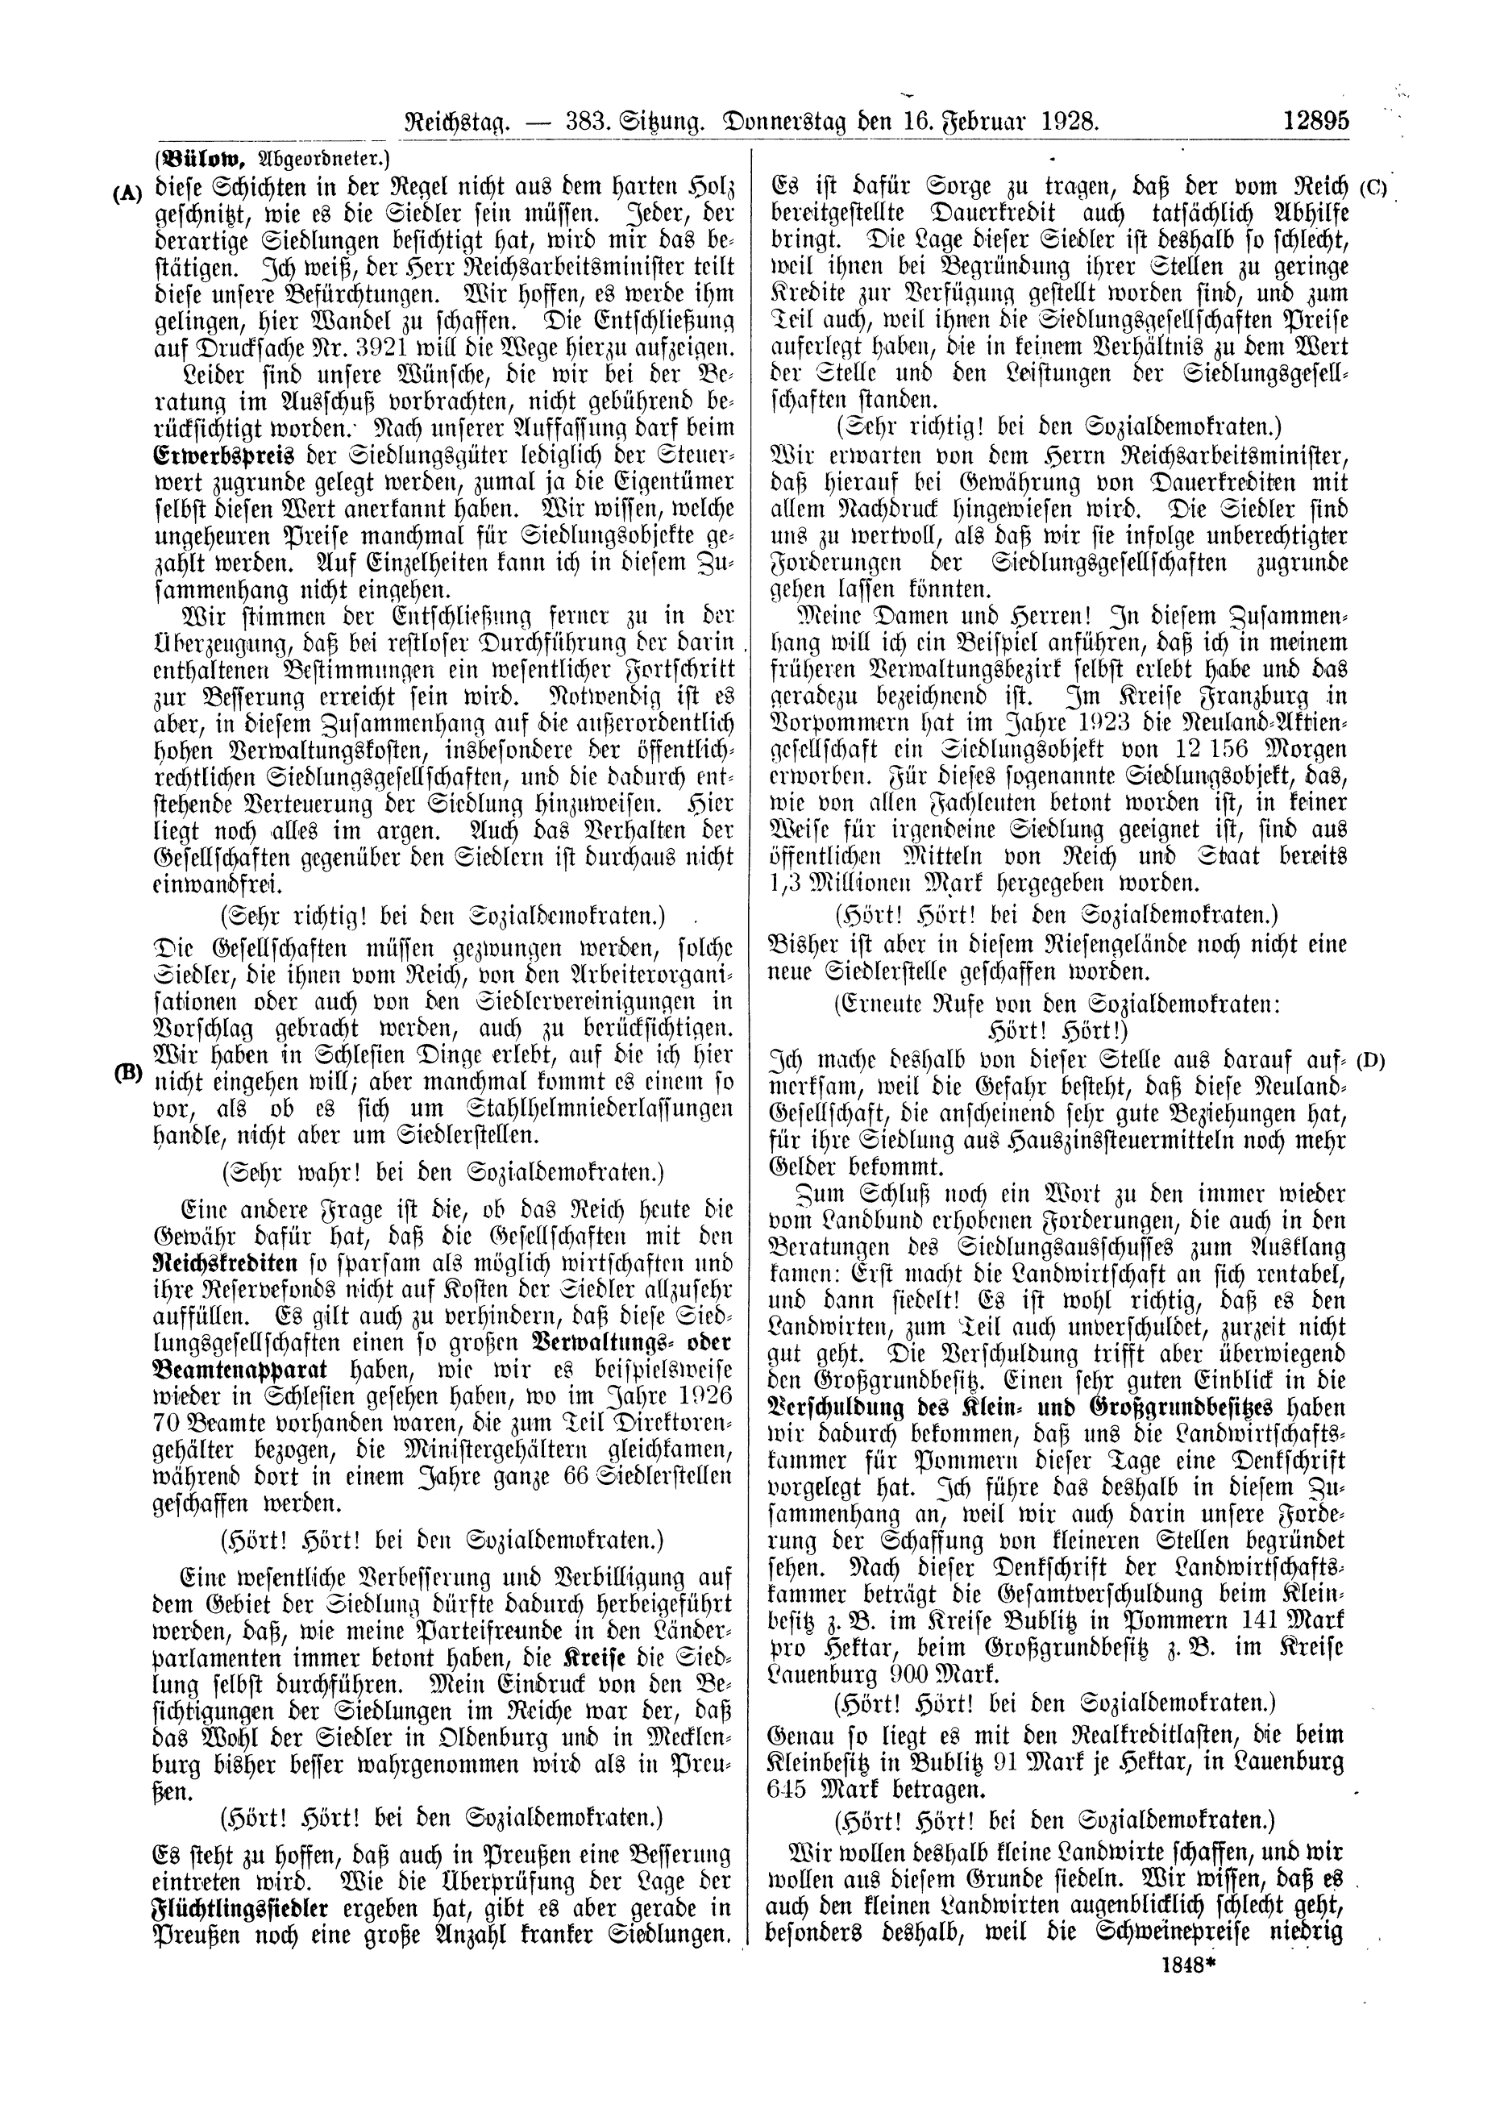 Scan of page 12895